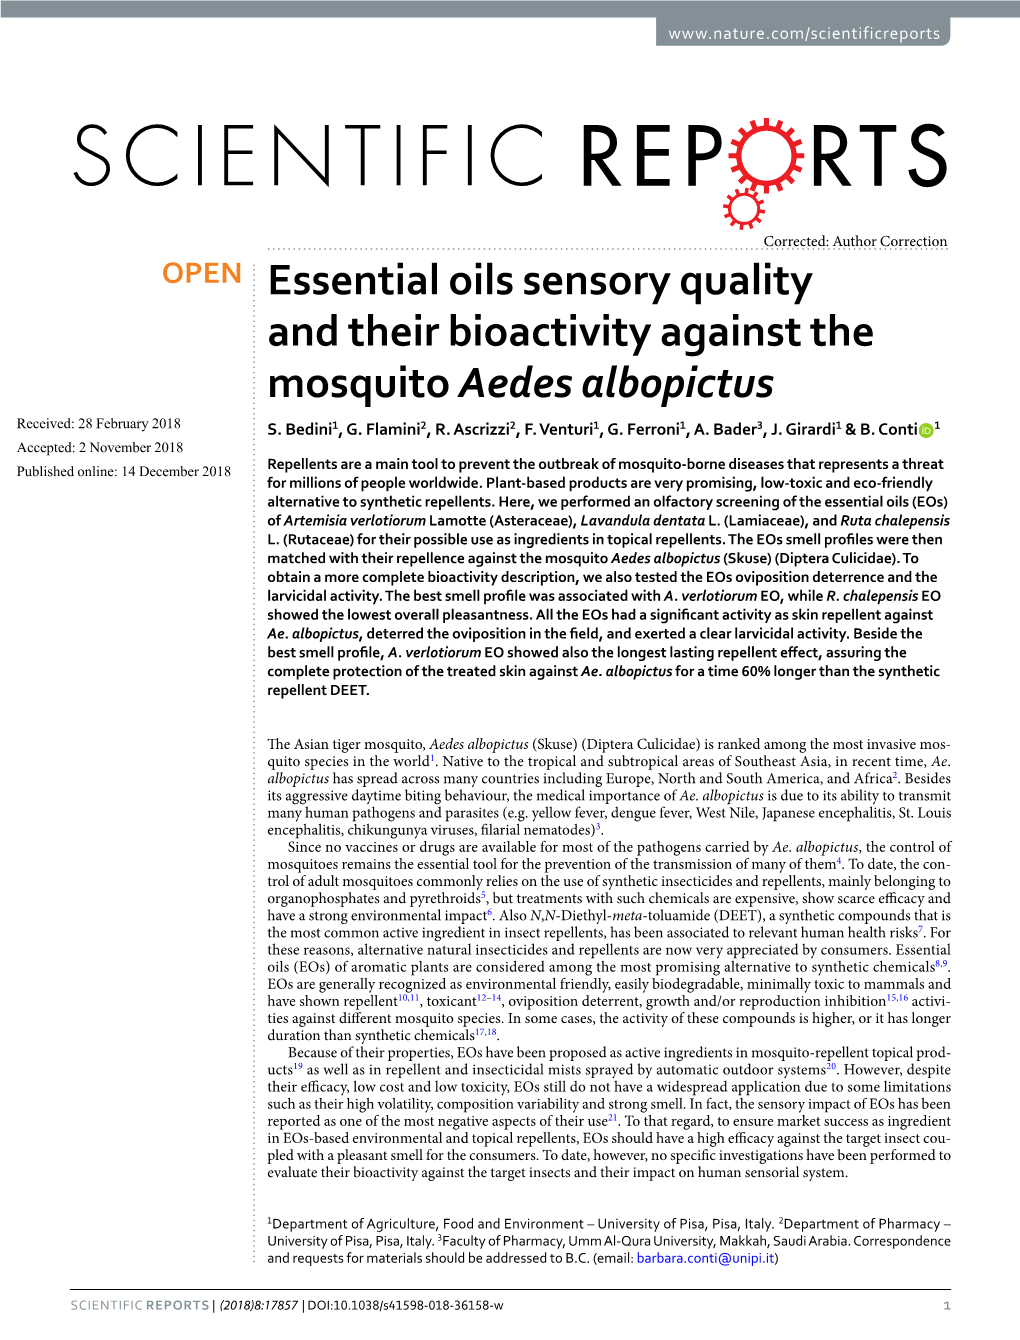 Essential Oils Sensory Quality and Their Bioactivity Against the Mosquito Aedes Albopictus Received: 28 February 2018 S